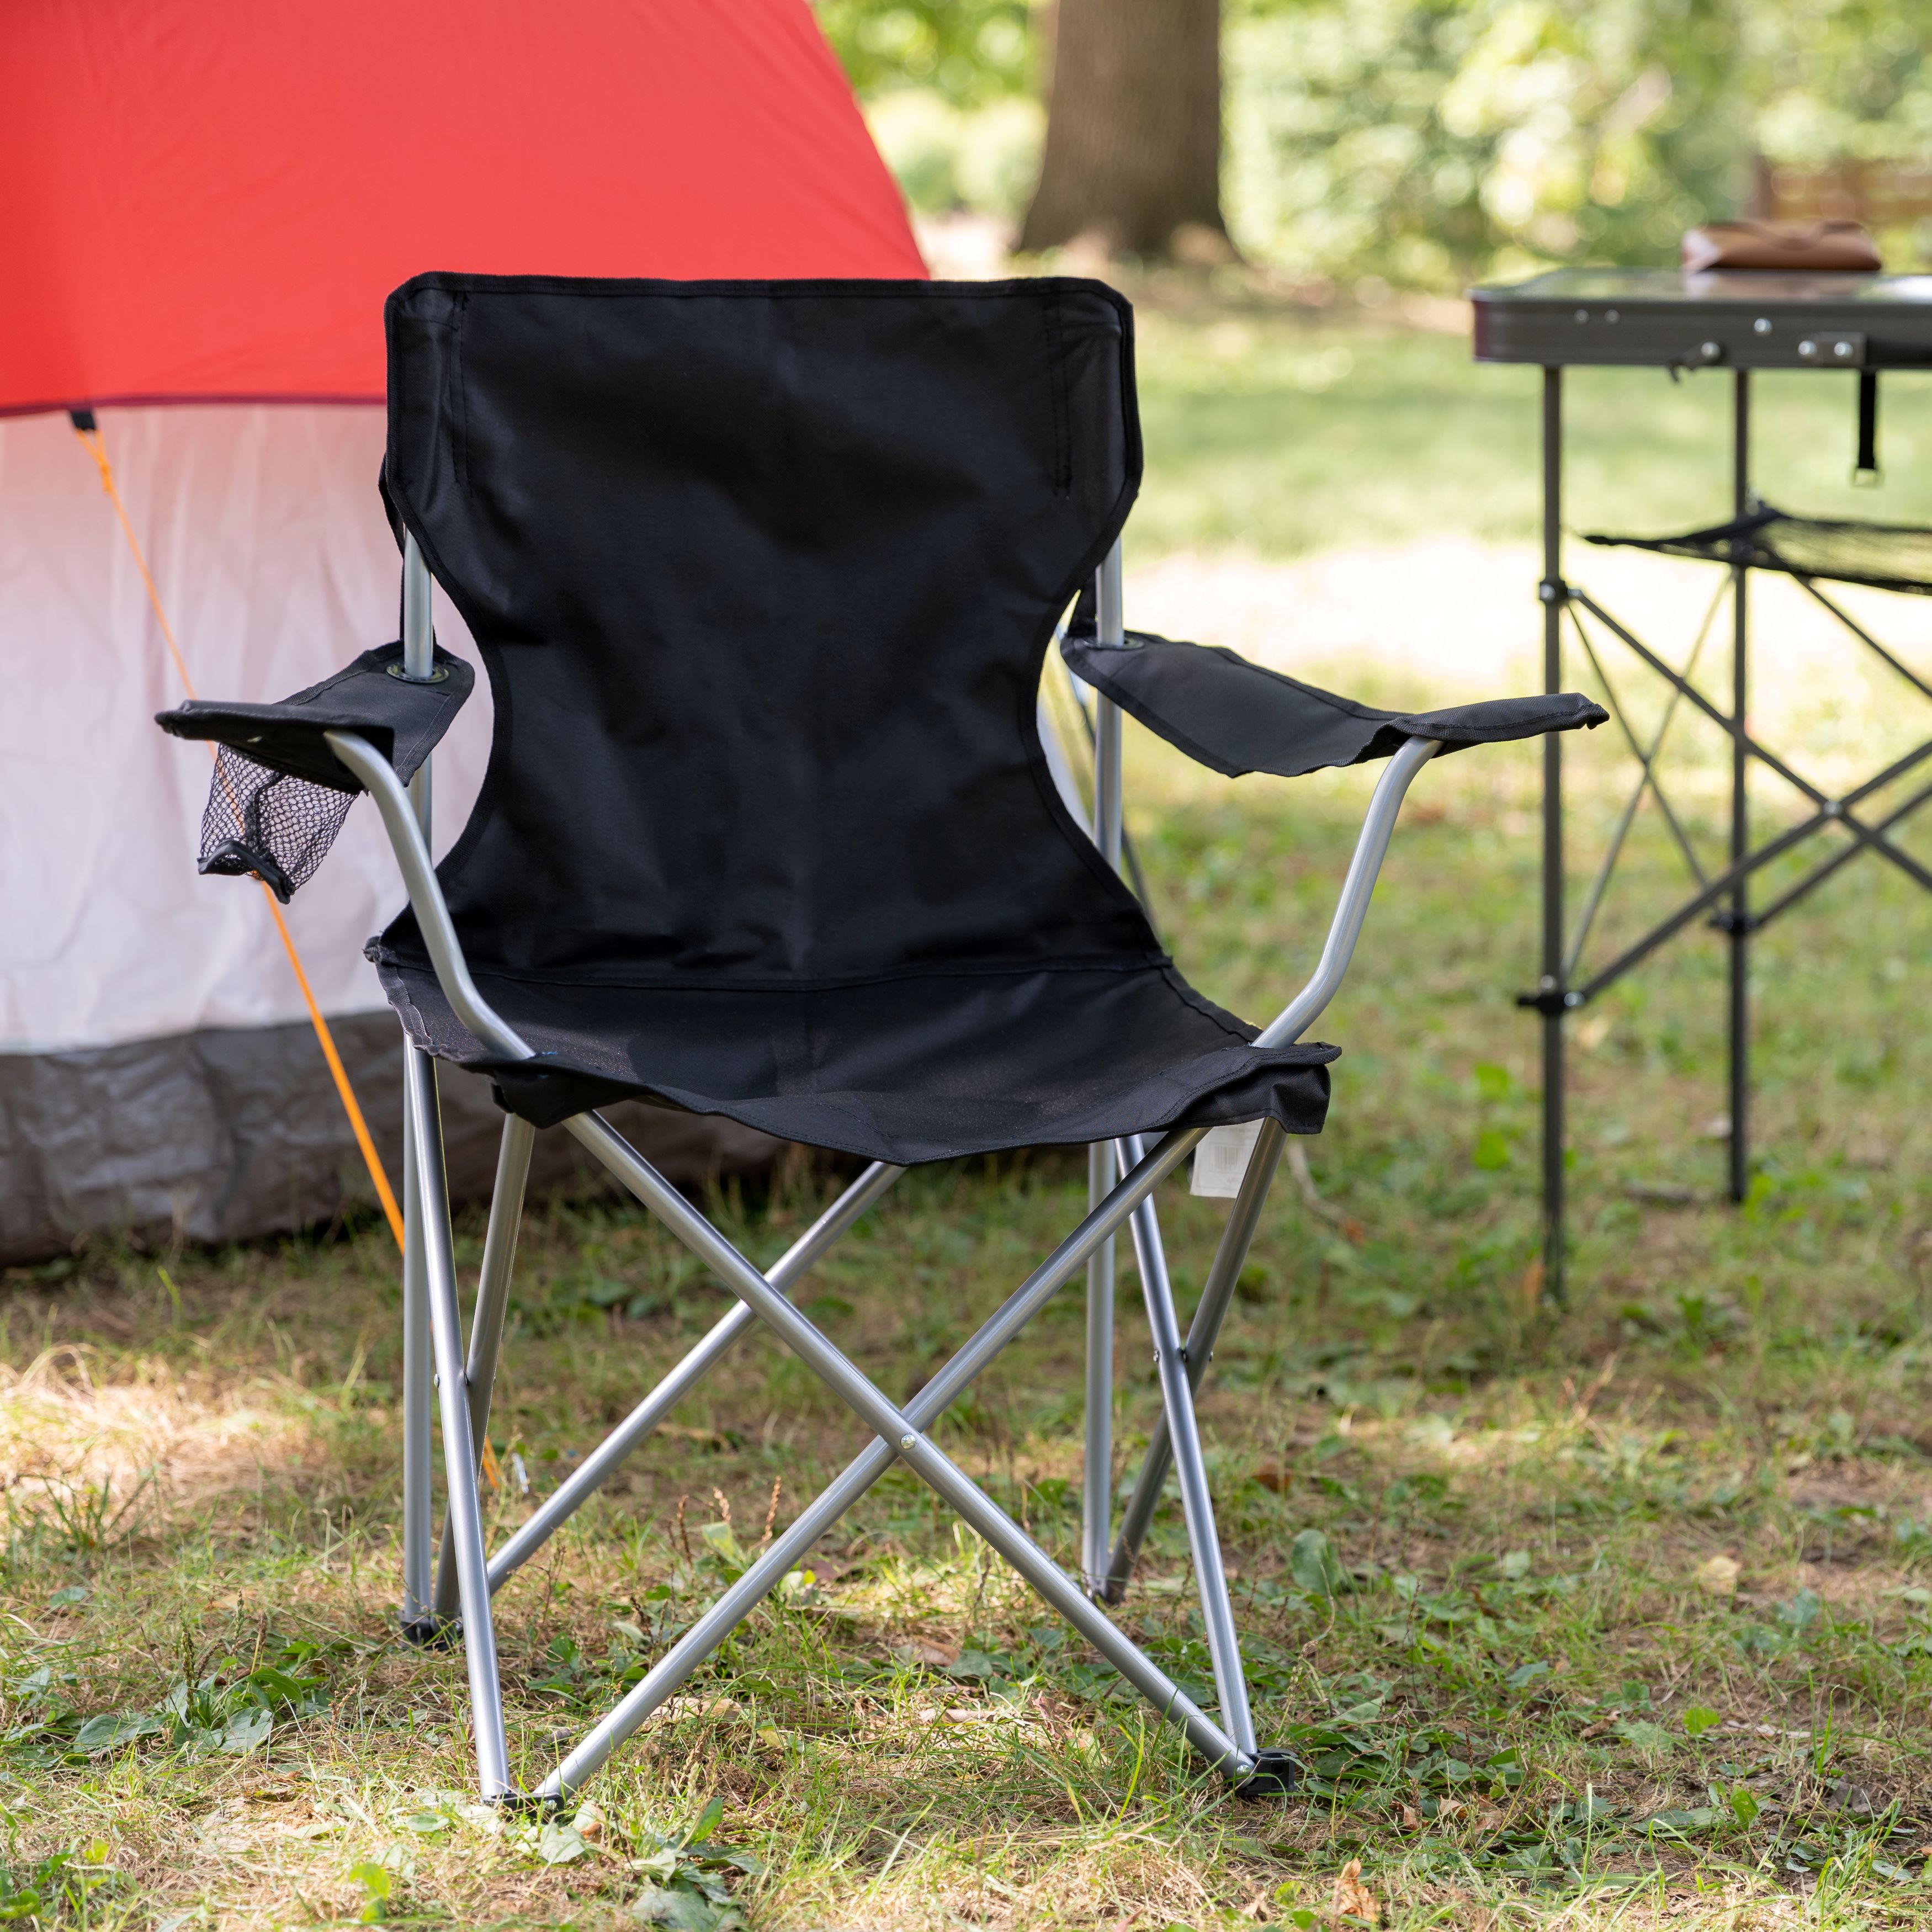 Ozark Trail Adult Basic Quad Folding Camp Chair with Cup Holder, Black - image 3 of 13